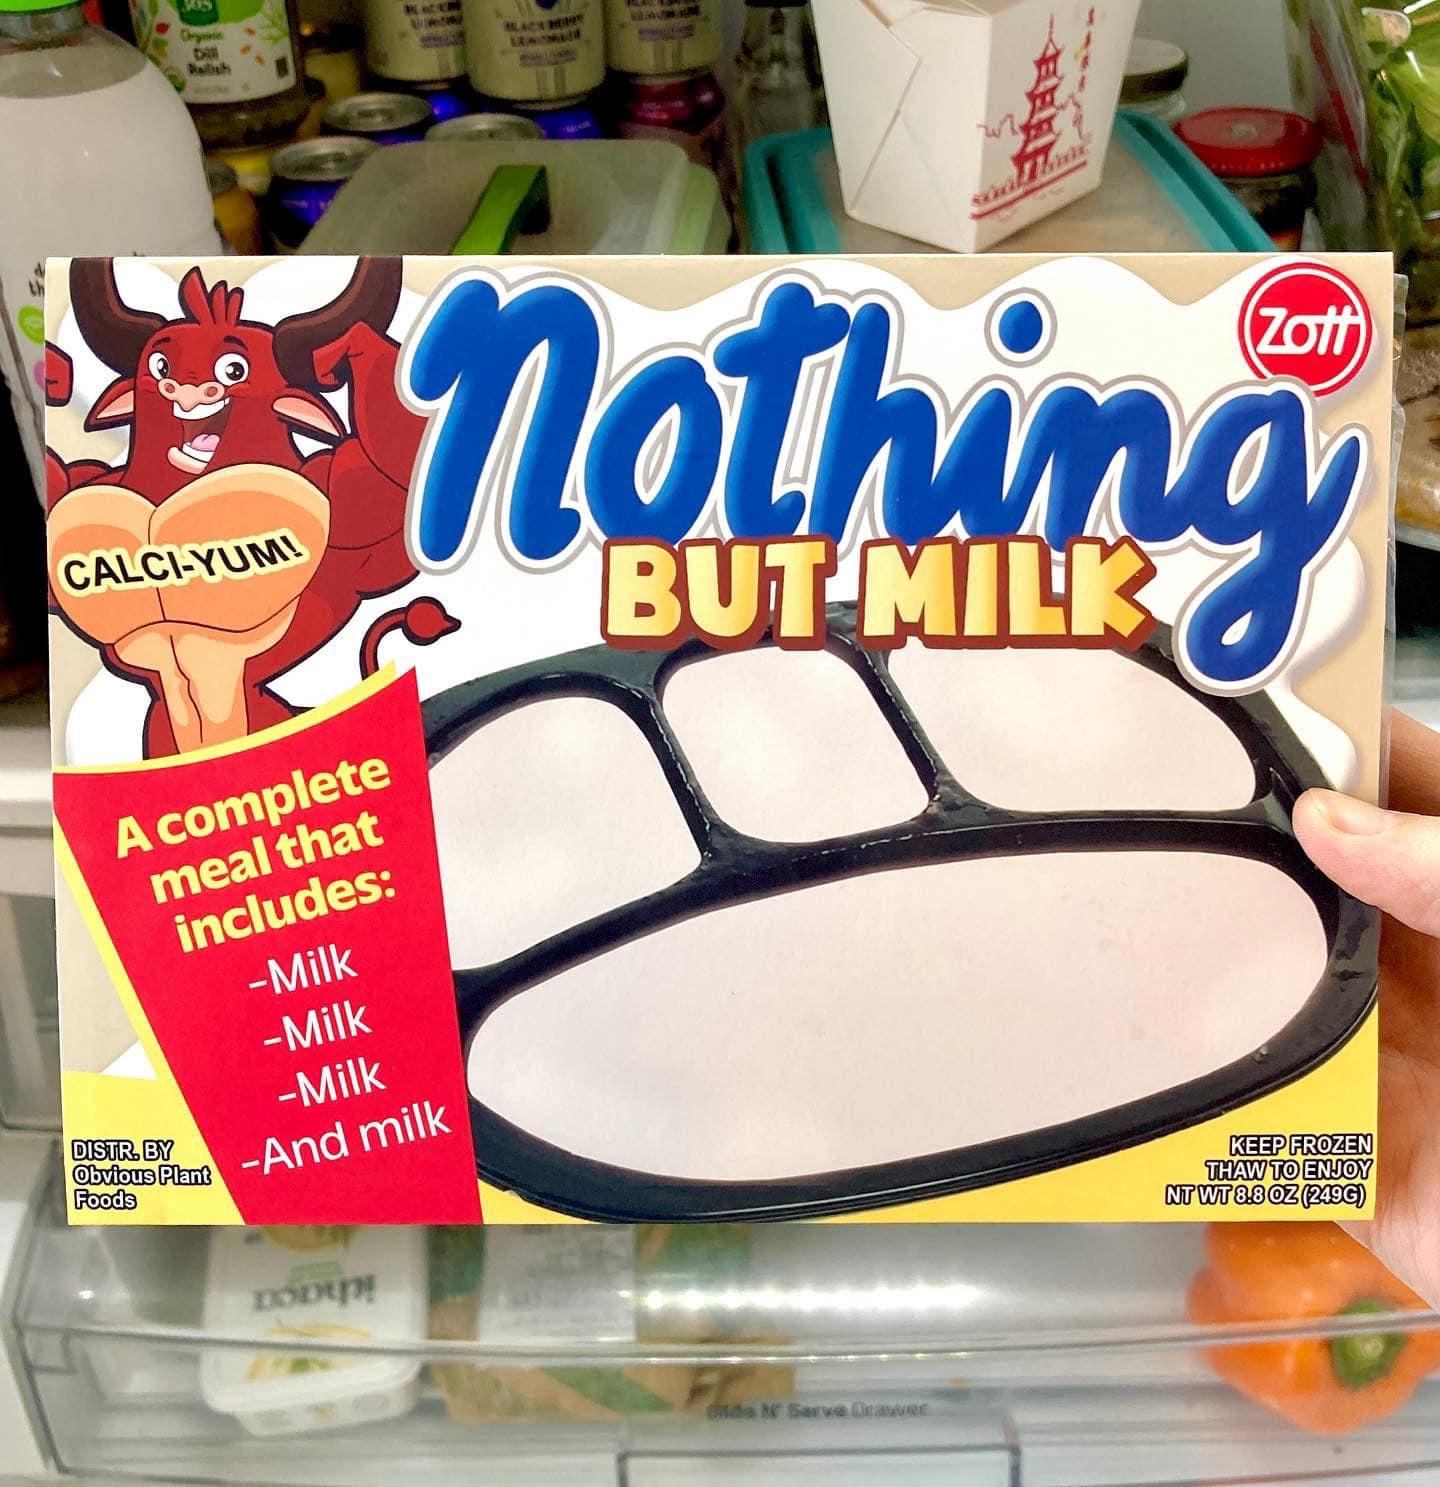 dank memes - zott - Jas Railish CalciYum! A complete meal that includes Milk Milk Milk And milk Distr. By Obvious Plant Foods D Cum Black Berry Utwissell 11 Nothing But Milk scuolam de N Sarve Drawer Keep Frozen Thaw To Enjoy Nt Wt 8.8 Oz 249G